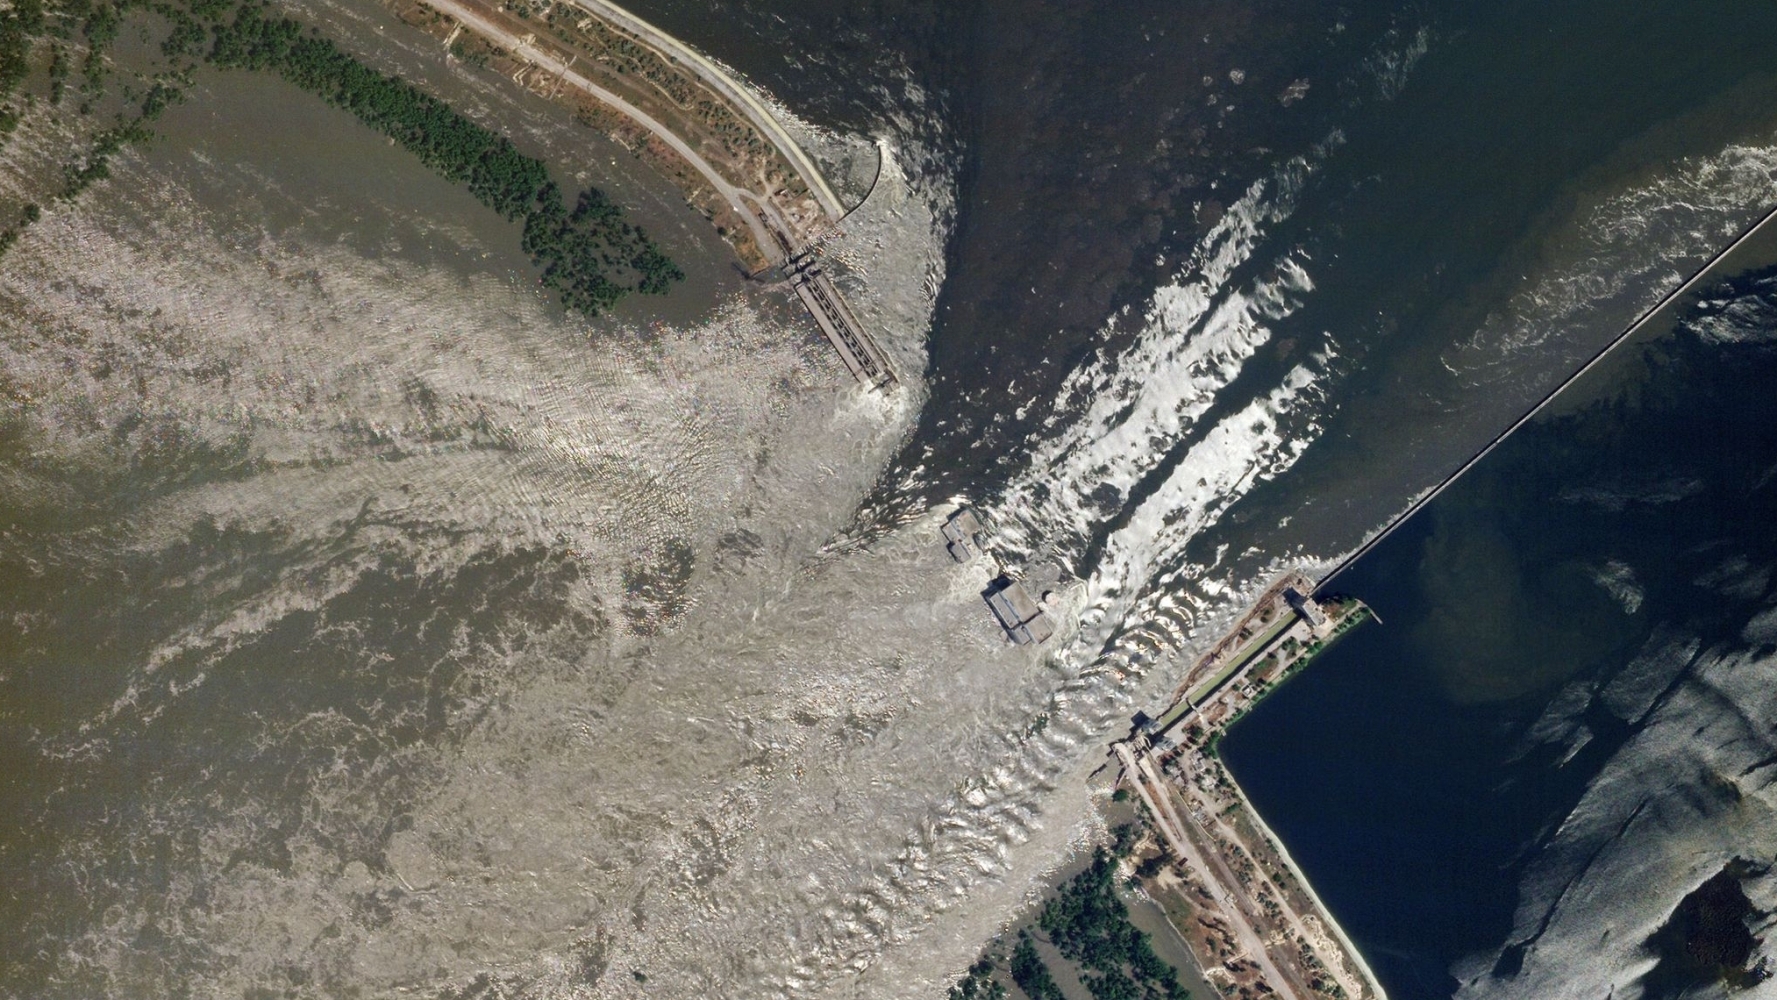 Blown up dam on the Dnpro river. Satellite photos have been released